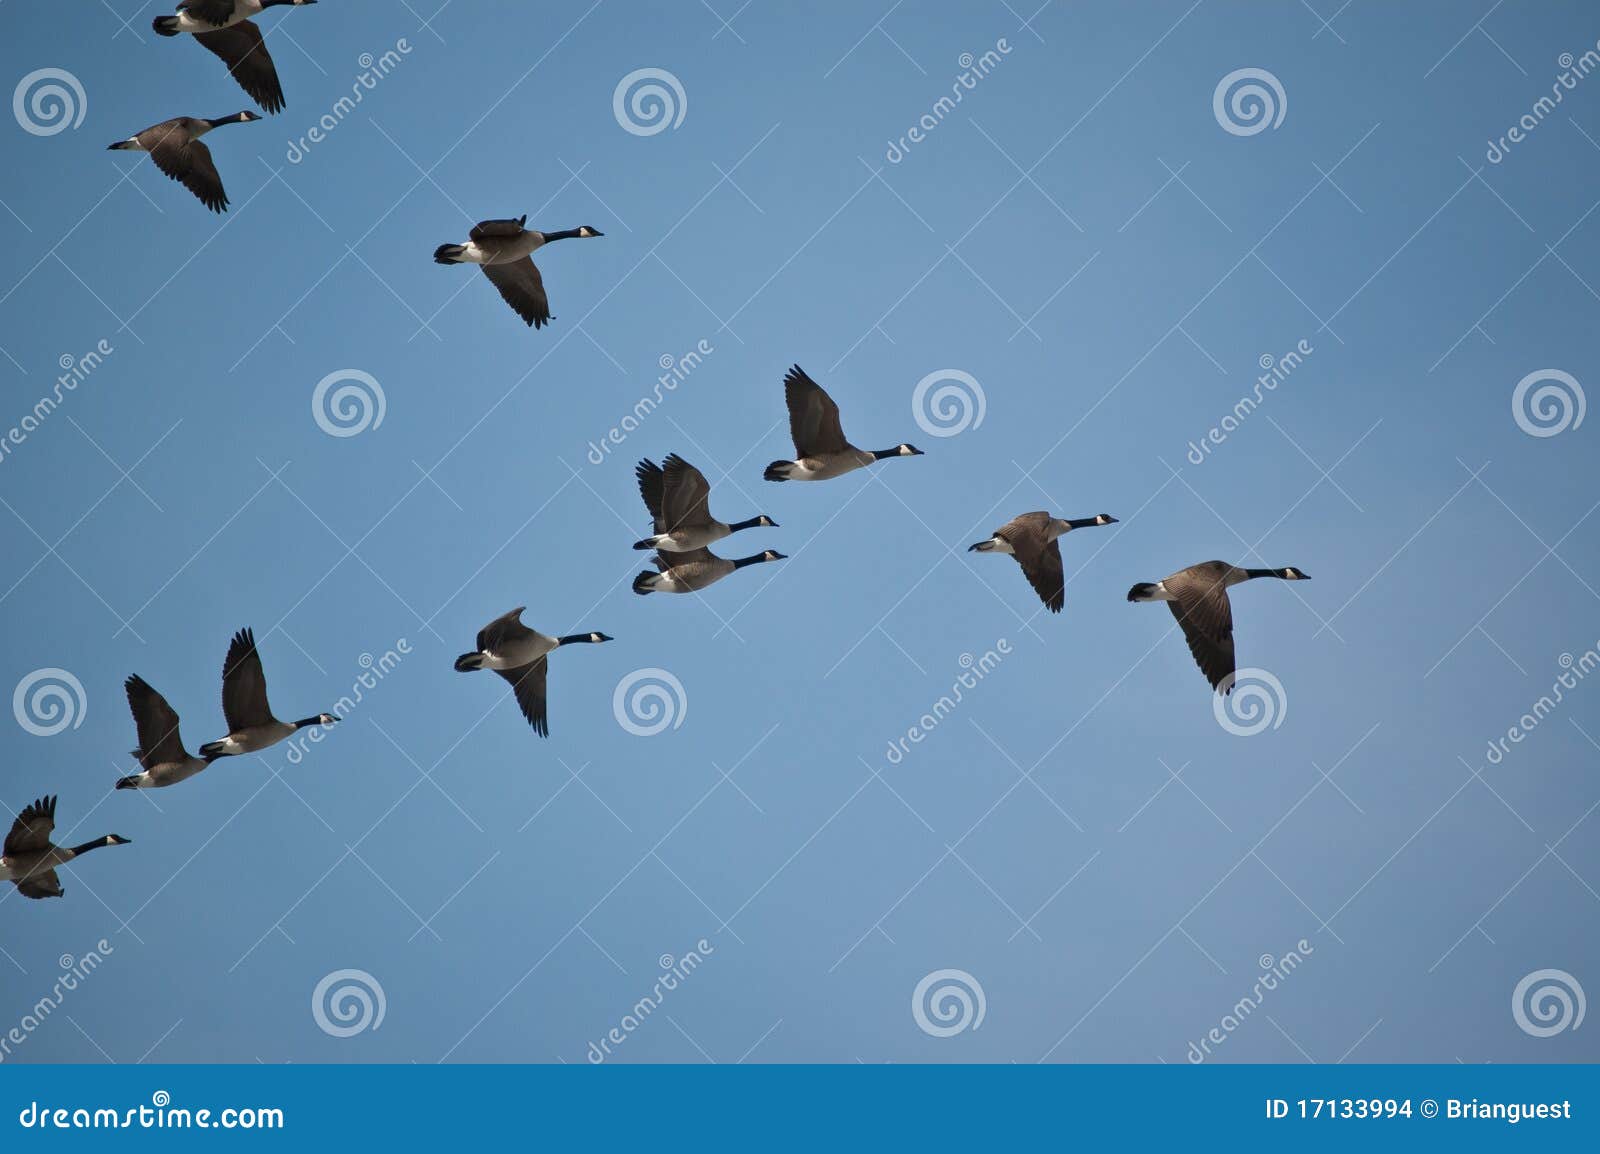 canada geese in flight